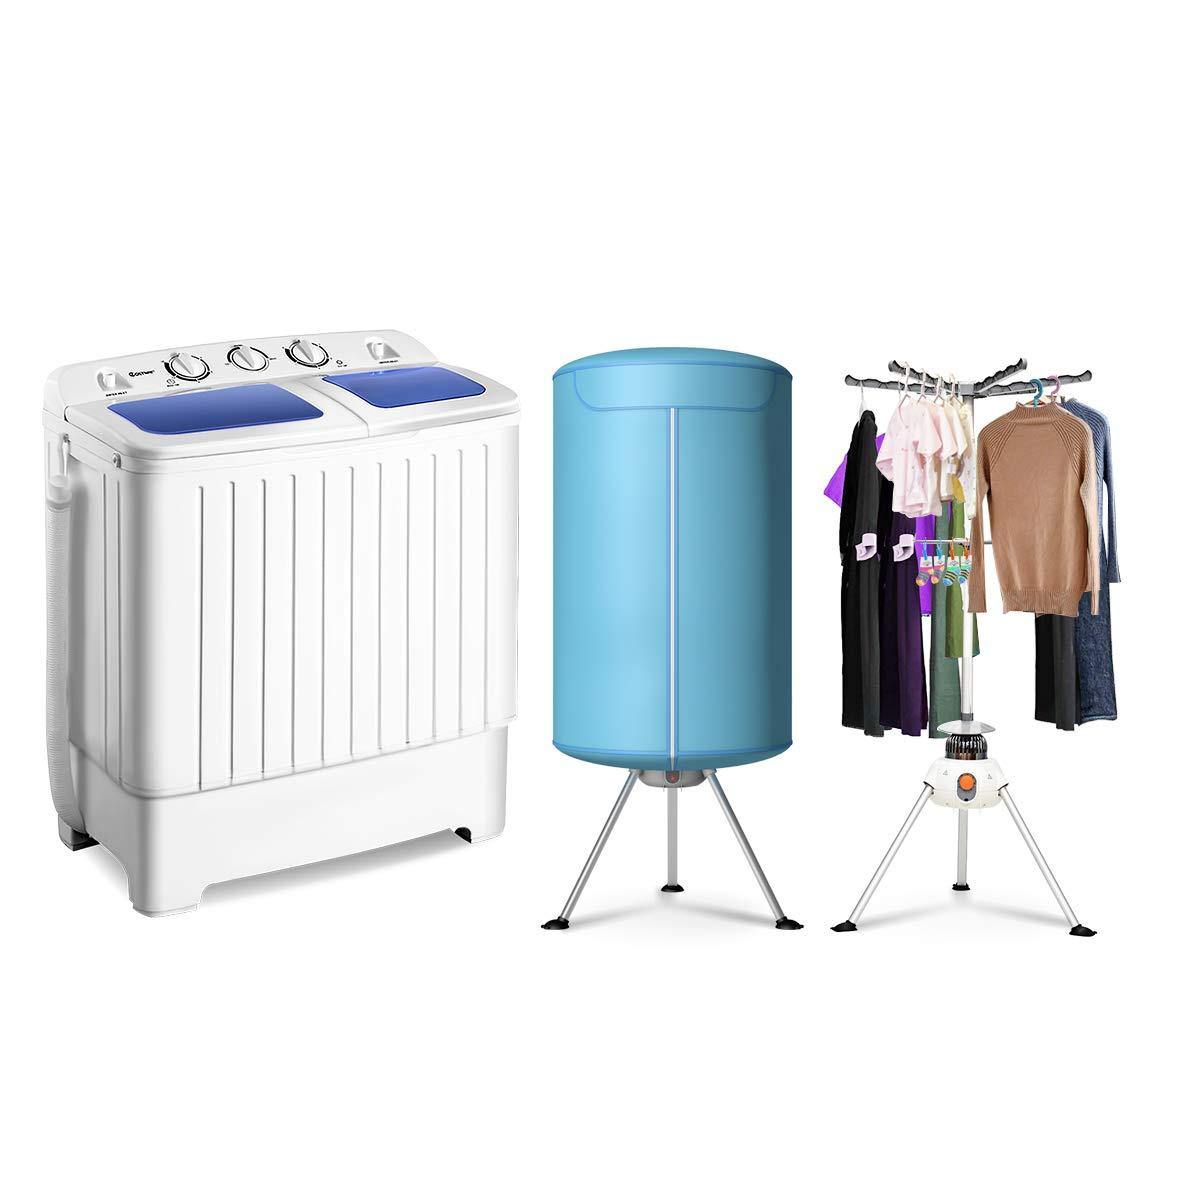 Costway Electric Portable Ventless Laundry Dryer, Folding Drying Machine  Heater 